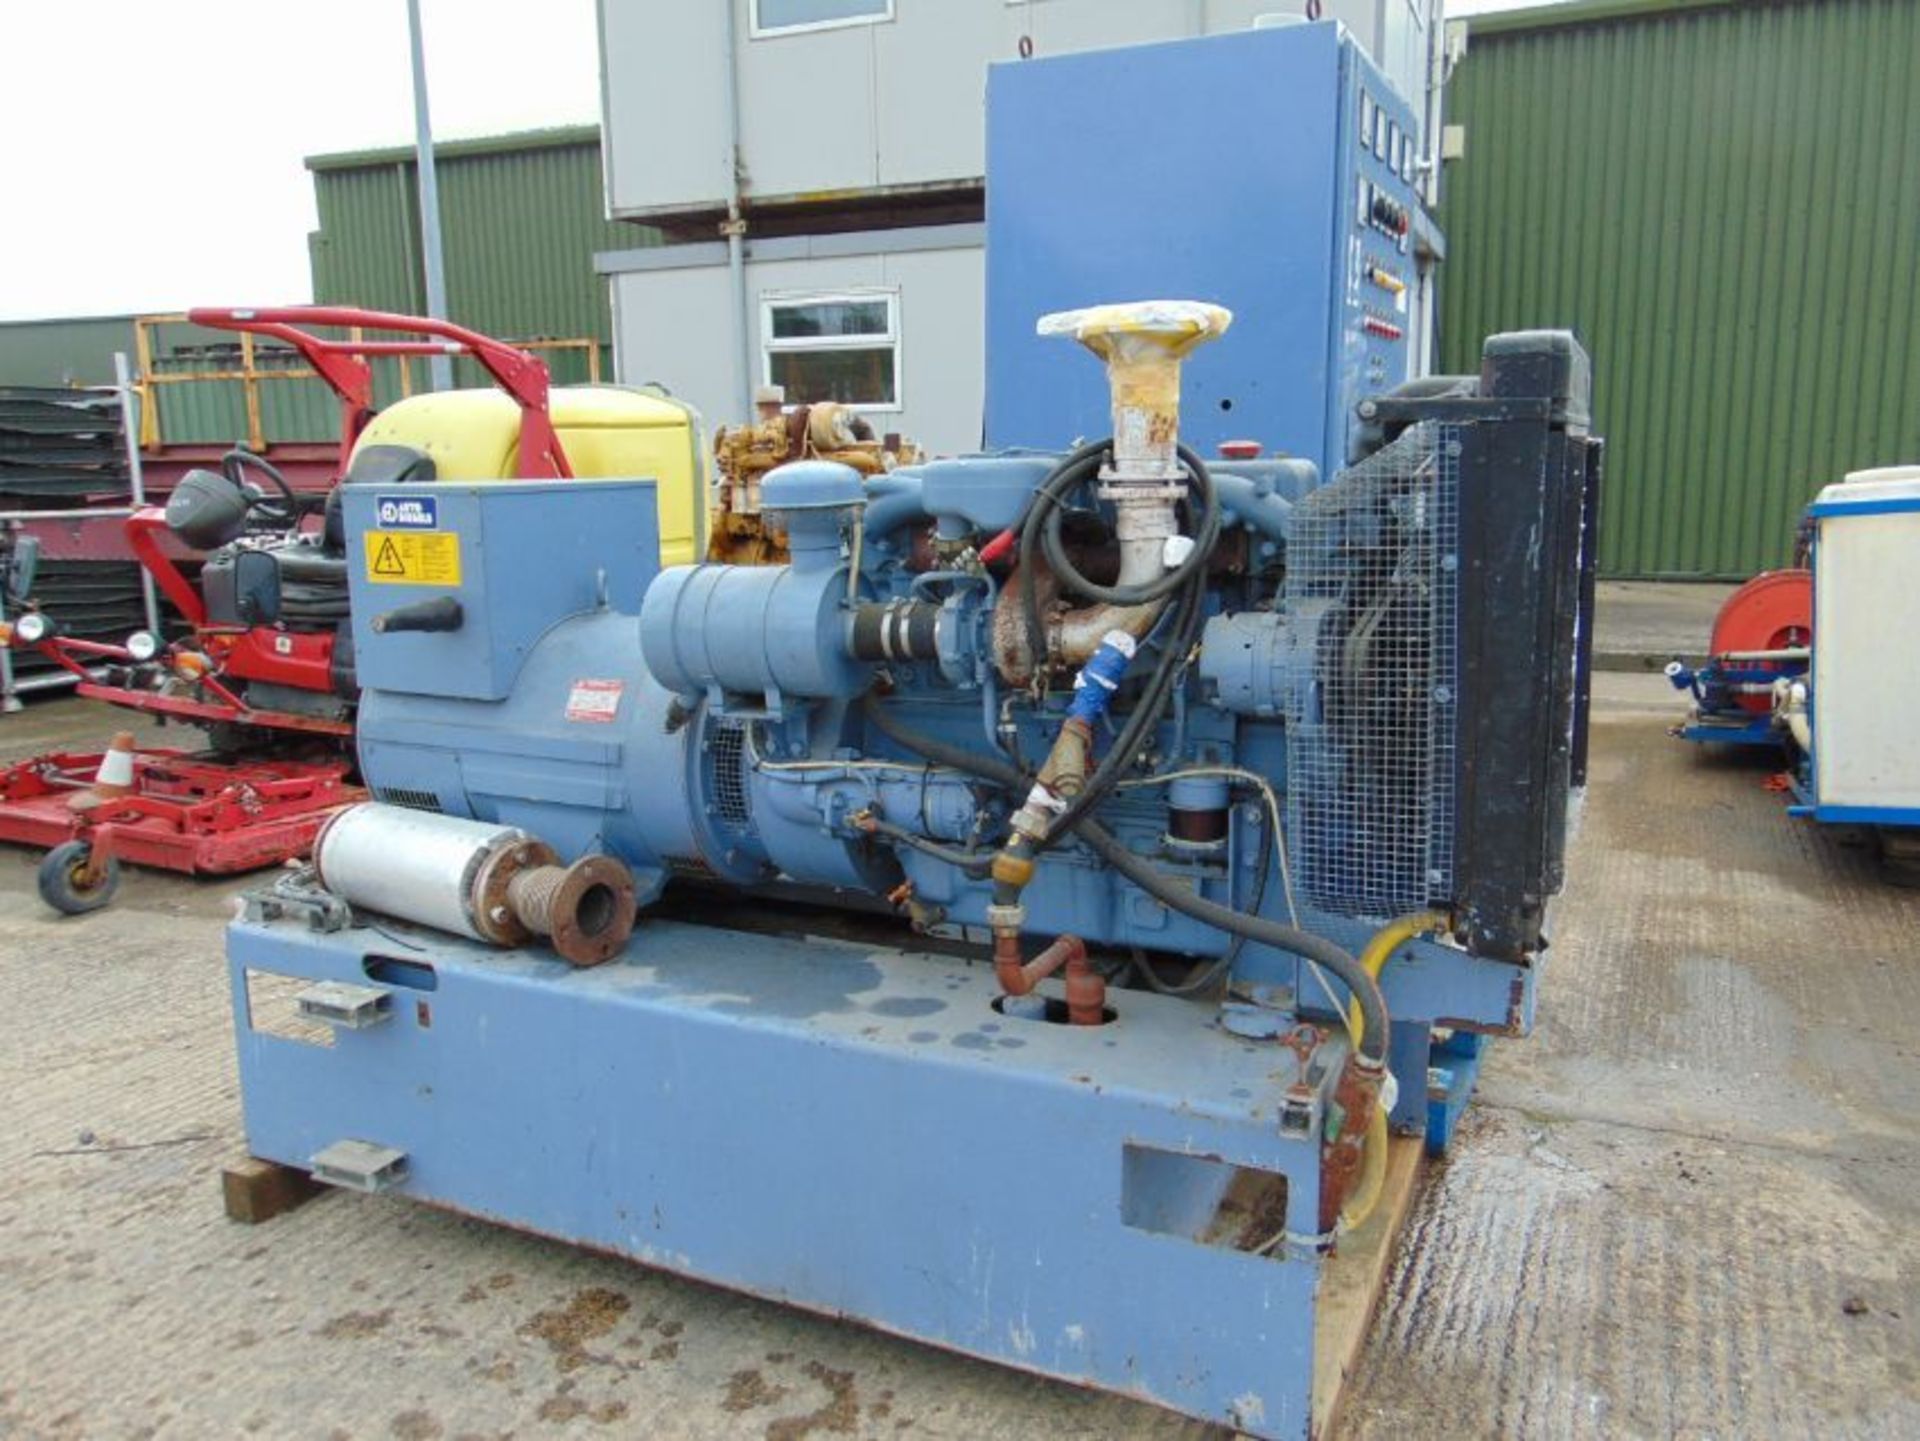 Auto Diesel 85 KVA 68 Kw 3 Phase 415/240V Standby Mains Faliure Perkins Diesel Generator 807 HOURS! - Image 2 of 20